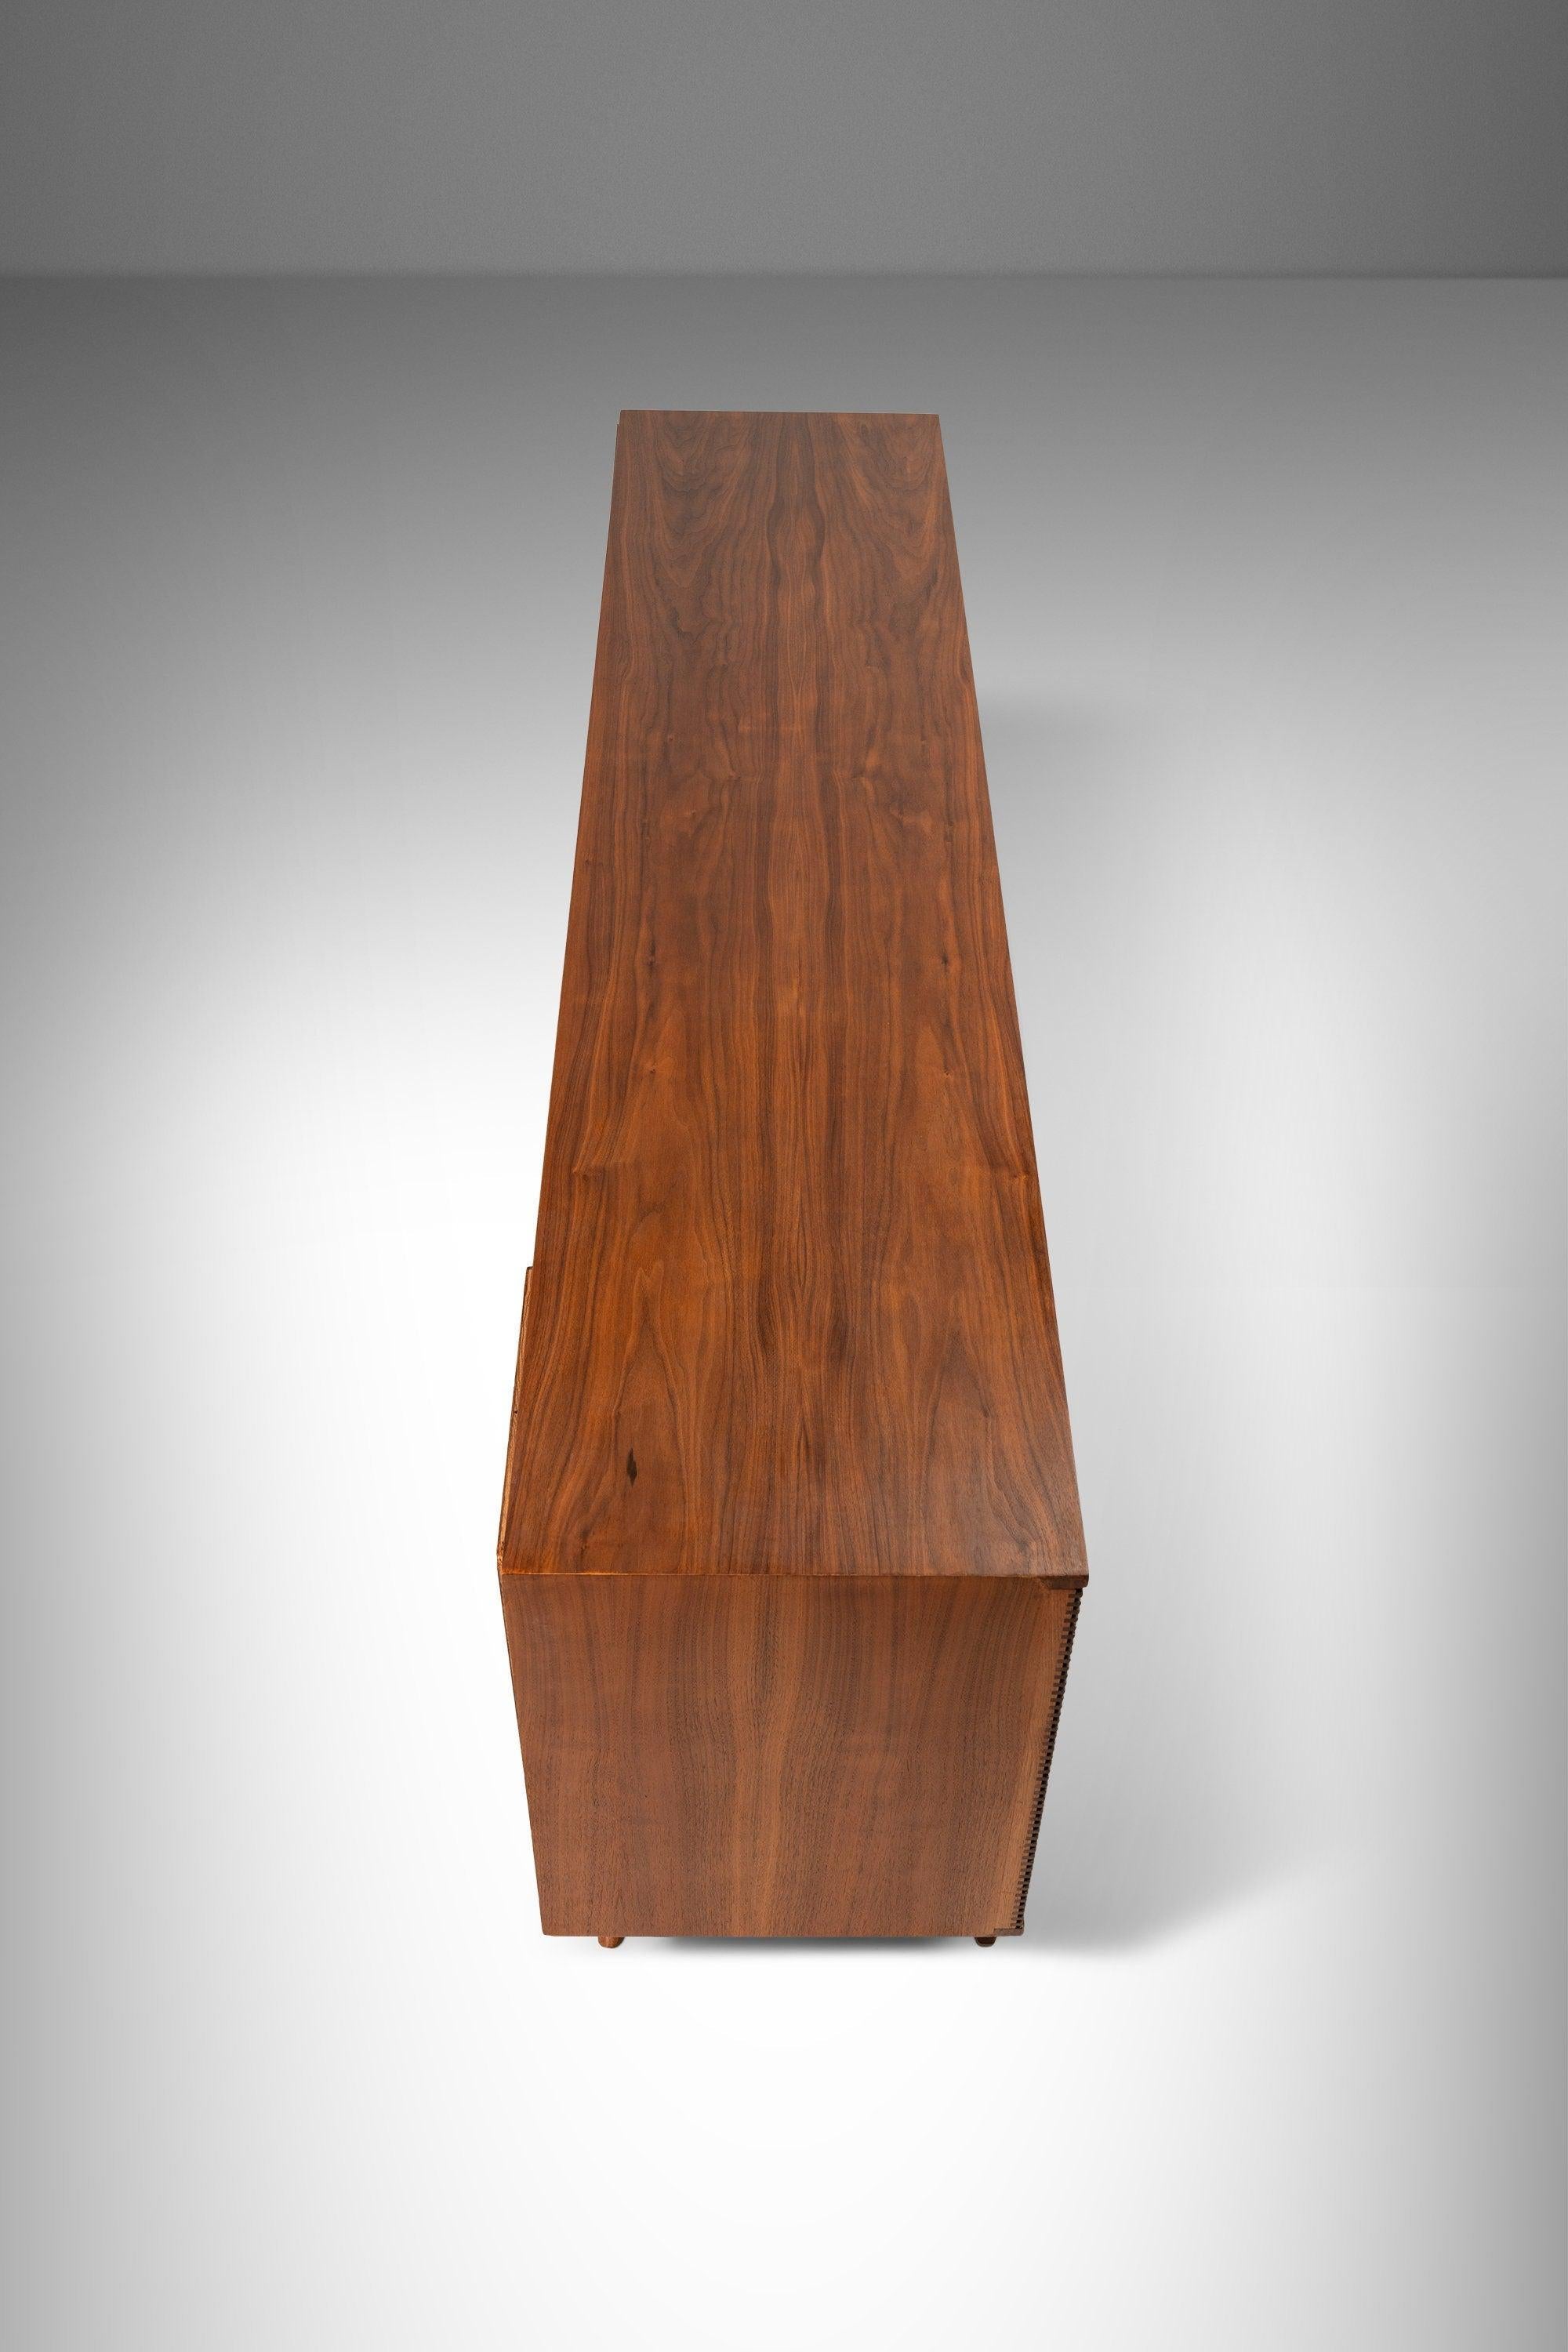 Credenza / Stereo Cabinet in Walnut in the Manner of Vladimir Kagan, USA, c 1960 2